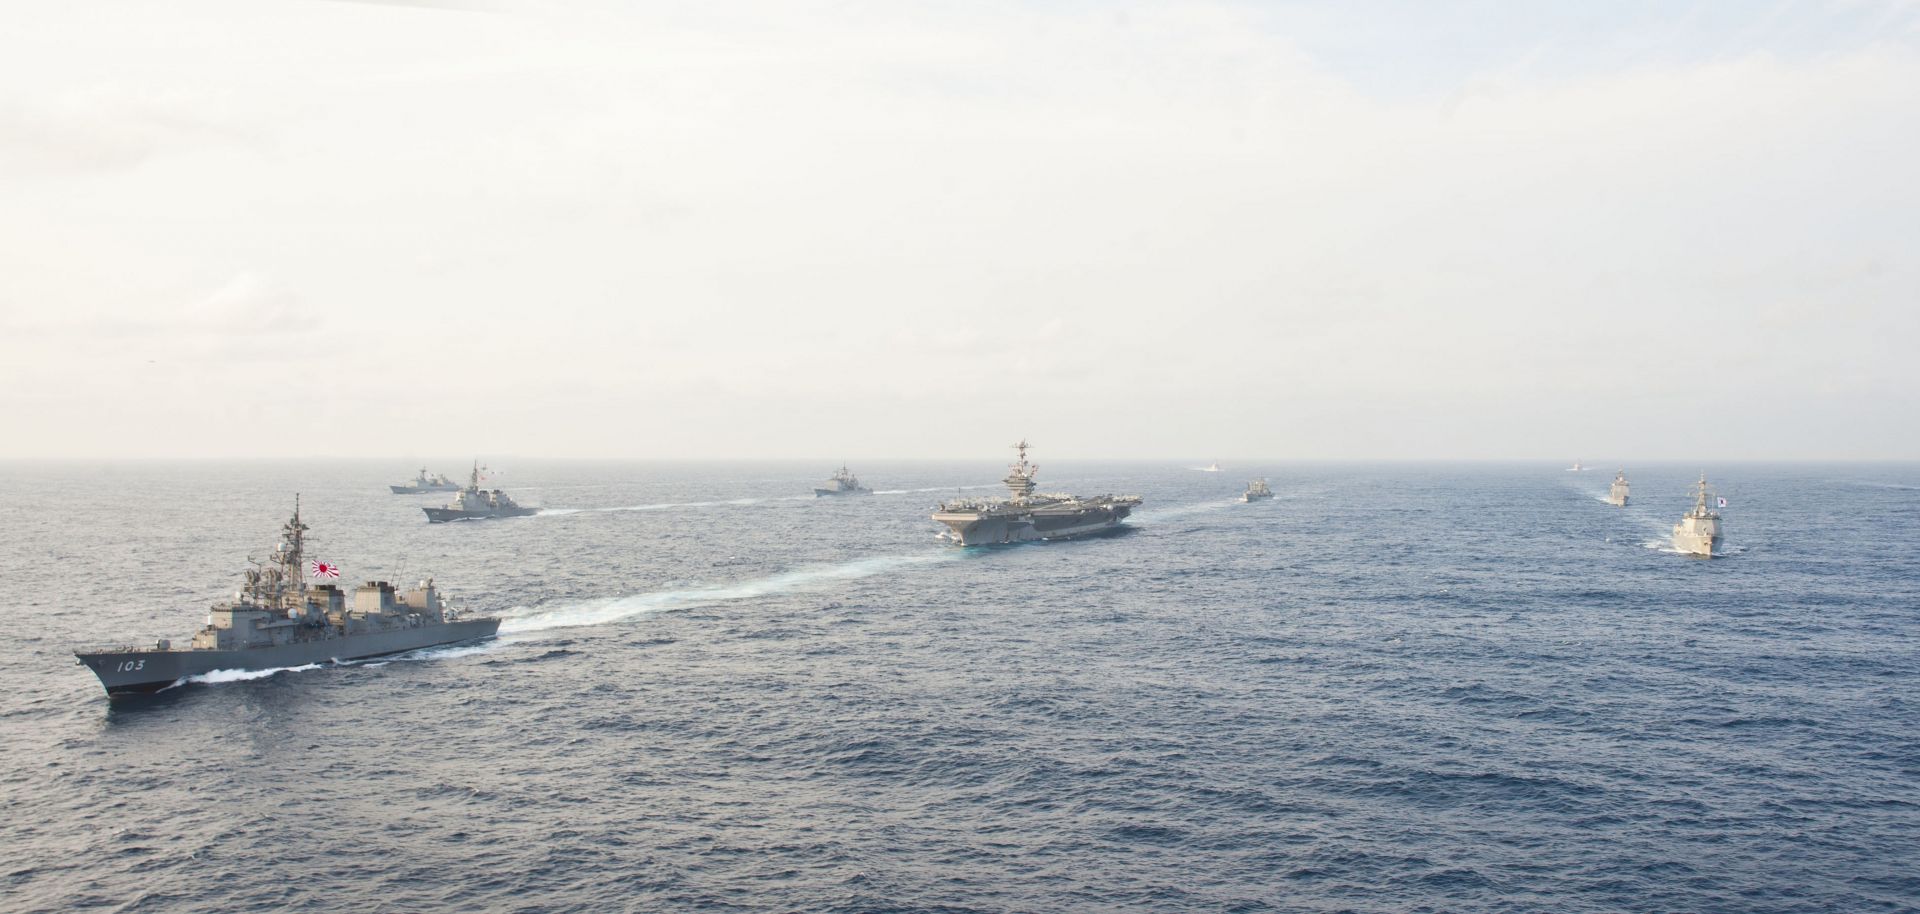 hips from the USS George Washington Carrier Strike Group, the Japanese Maritime Self-Defense Force and the Republic of Korea navy are underway during a trilateral exercise, East China Sea, 2012. 